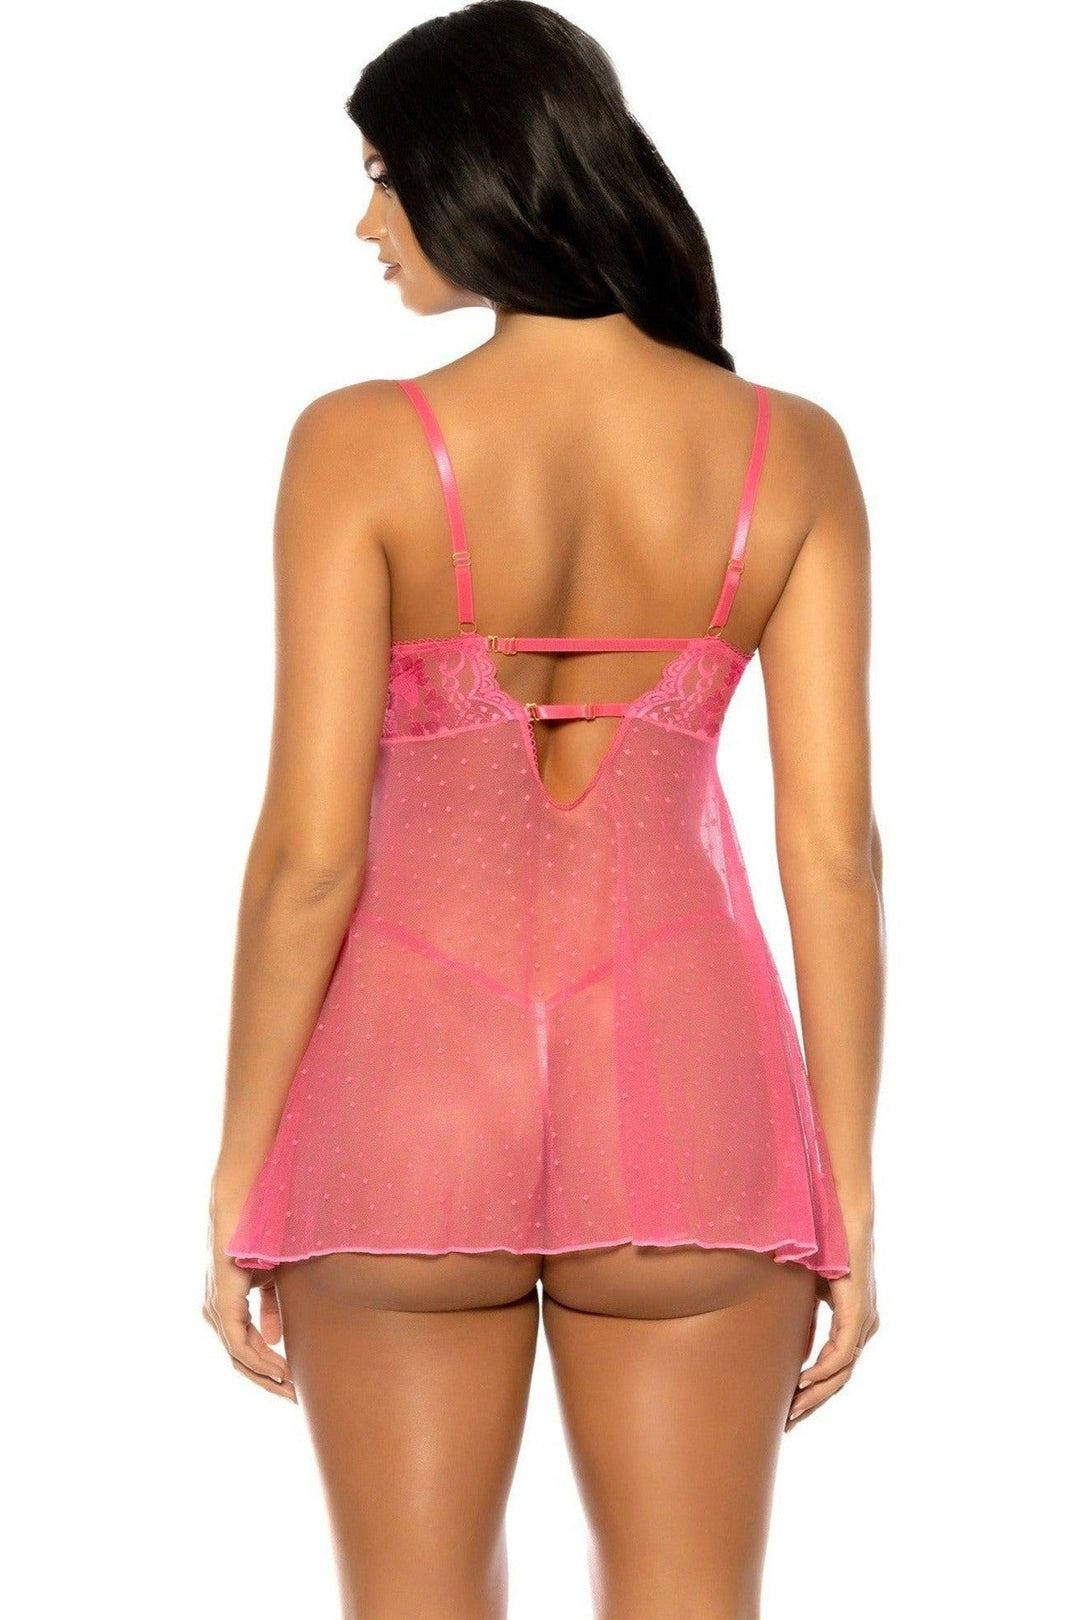 Soft Cup Lace Babydoll with Decorative Elastic Details and Matching Panty | Pink